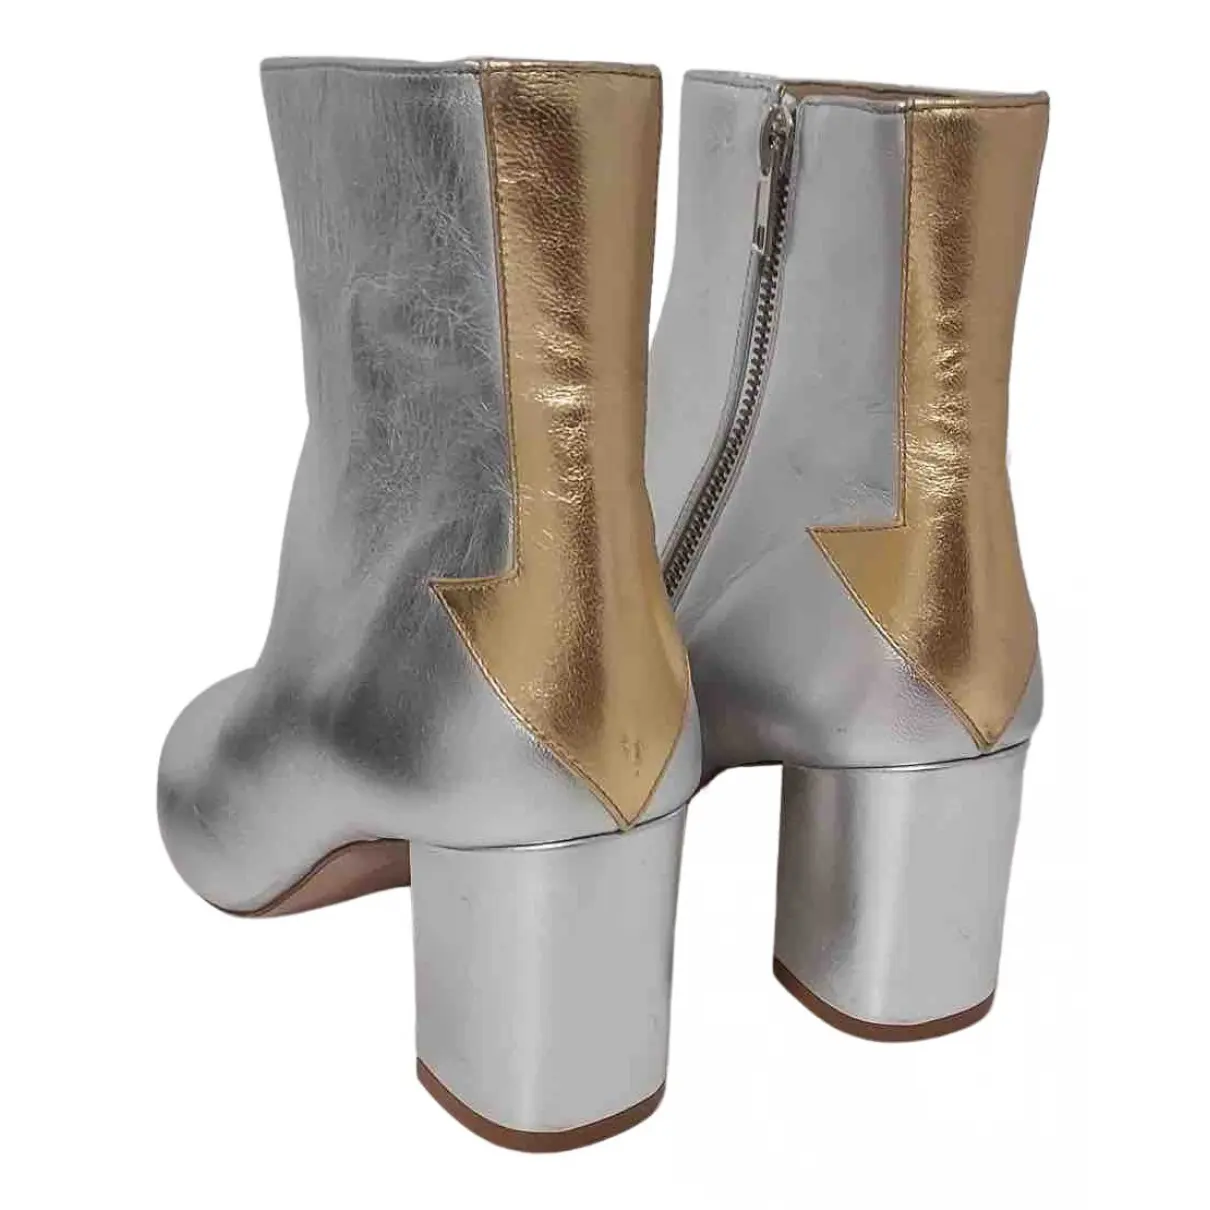 Leather ankle boots Camilla Elphick